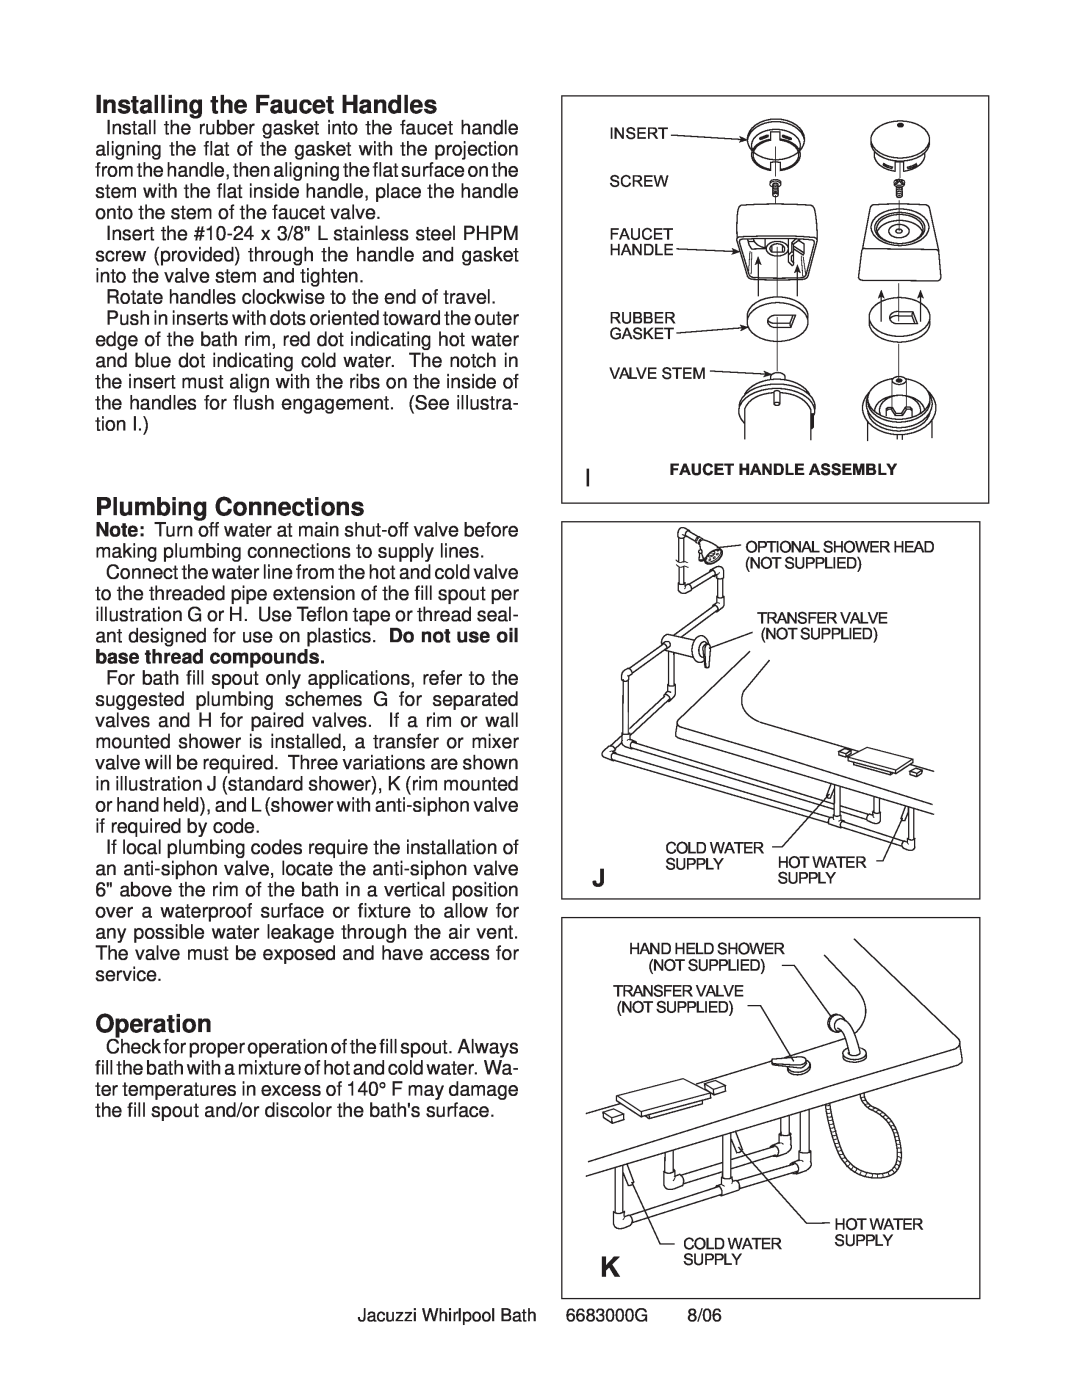 Jacuzzi Faucet Kit installation instructions Installing the Faucet Handles, Plumbing Connections, Operation 